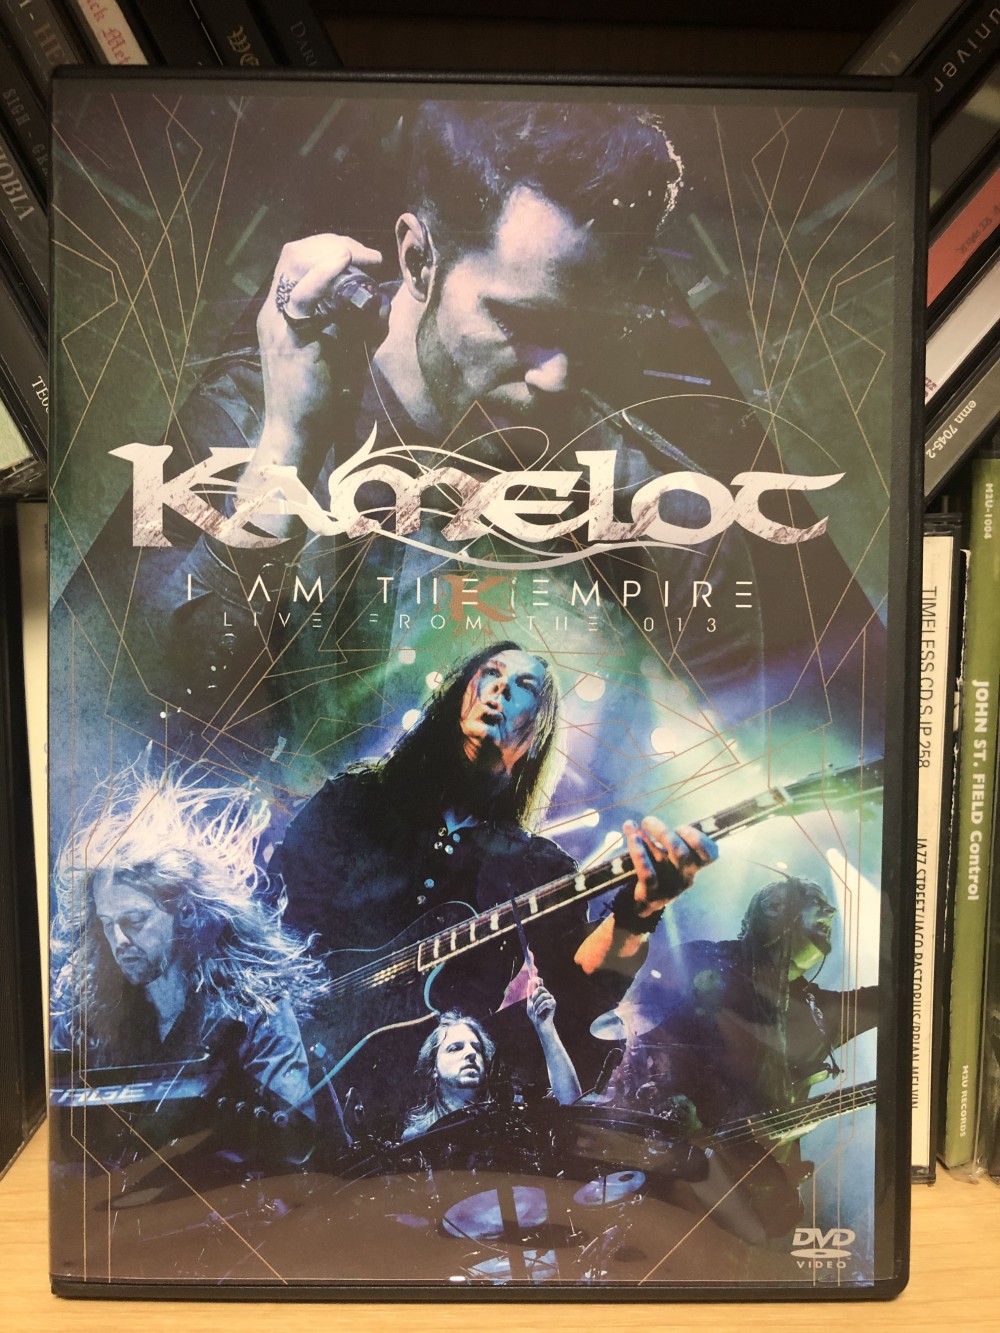 Kamelot - I Am the Empire: Live from the 013 CD, DVD Photo